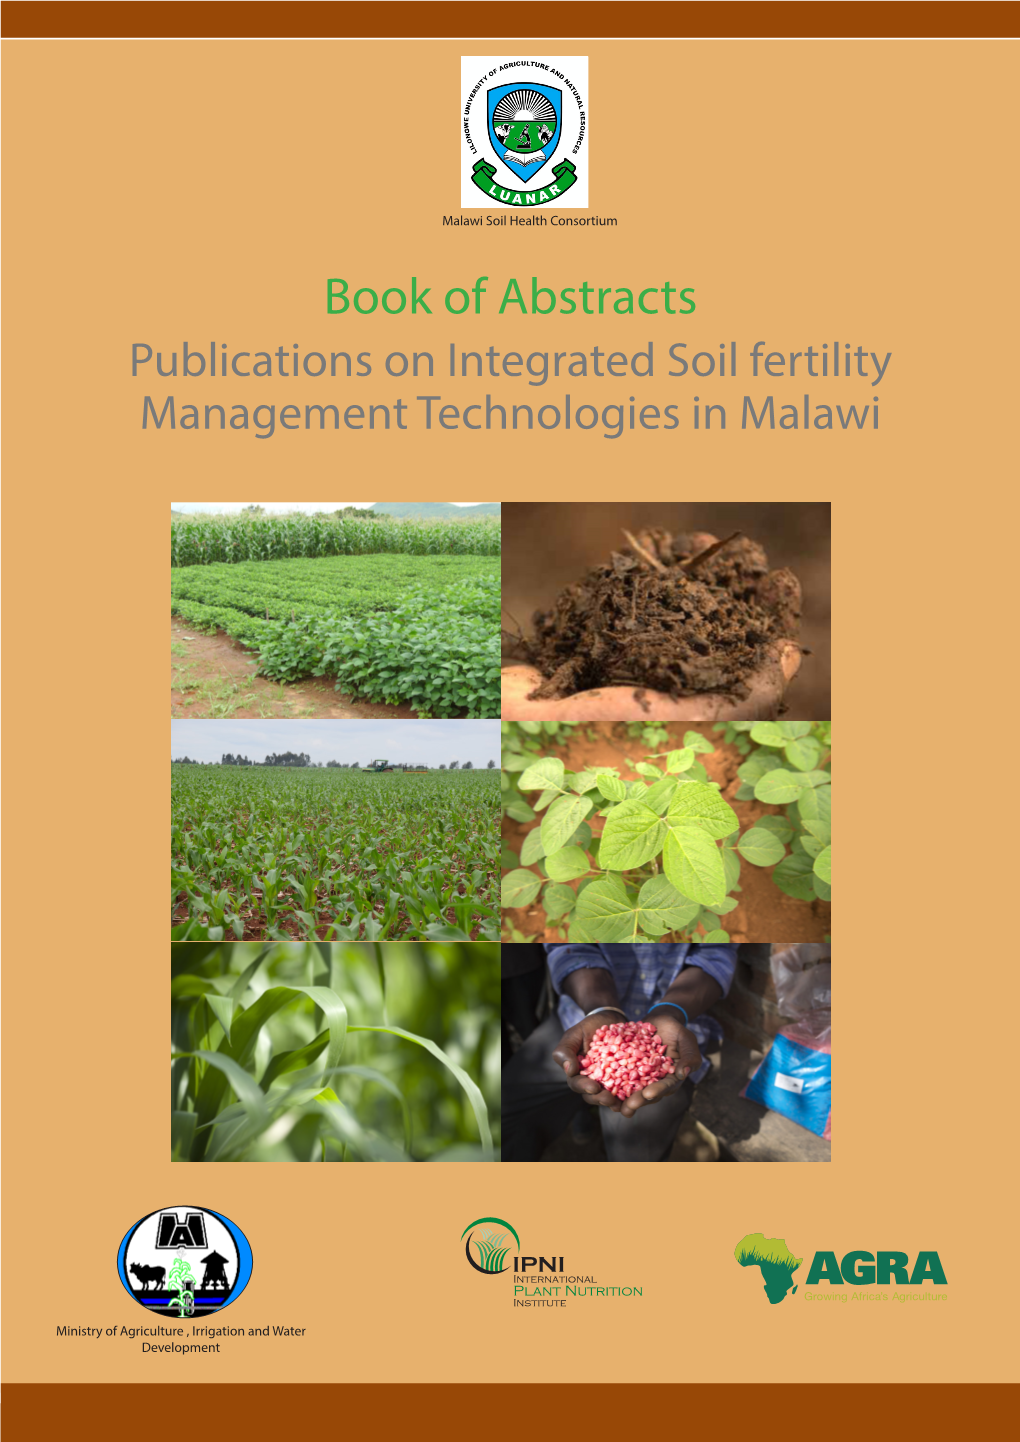 Book of Abstracts on ISFM Technologies in Malawi